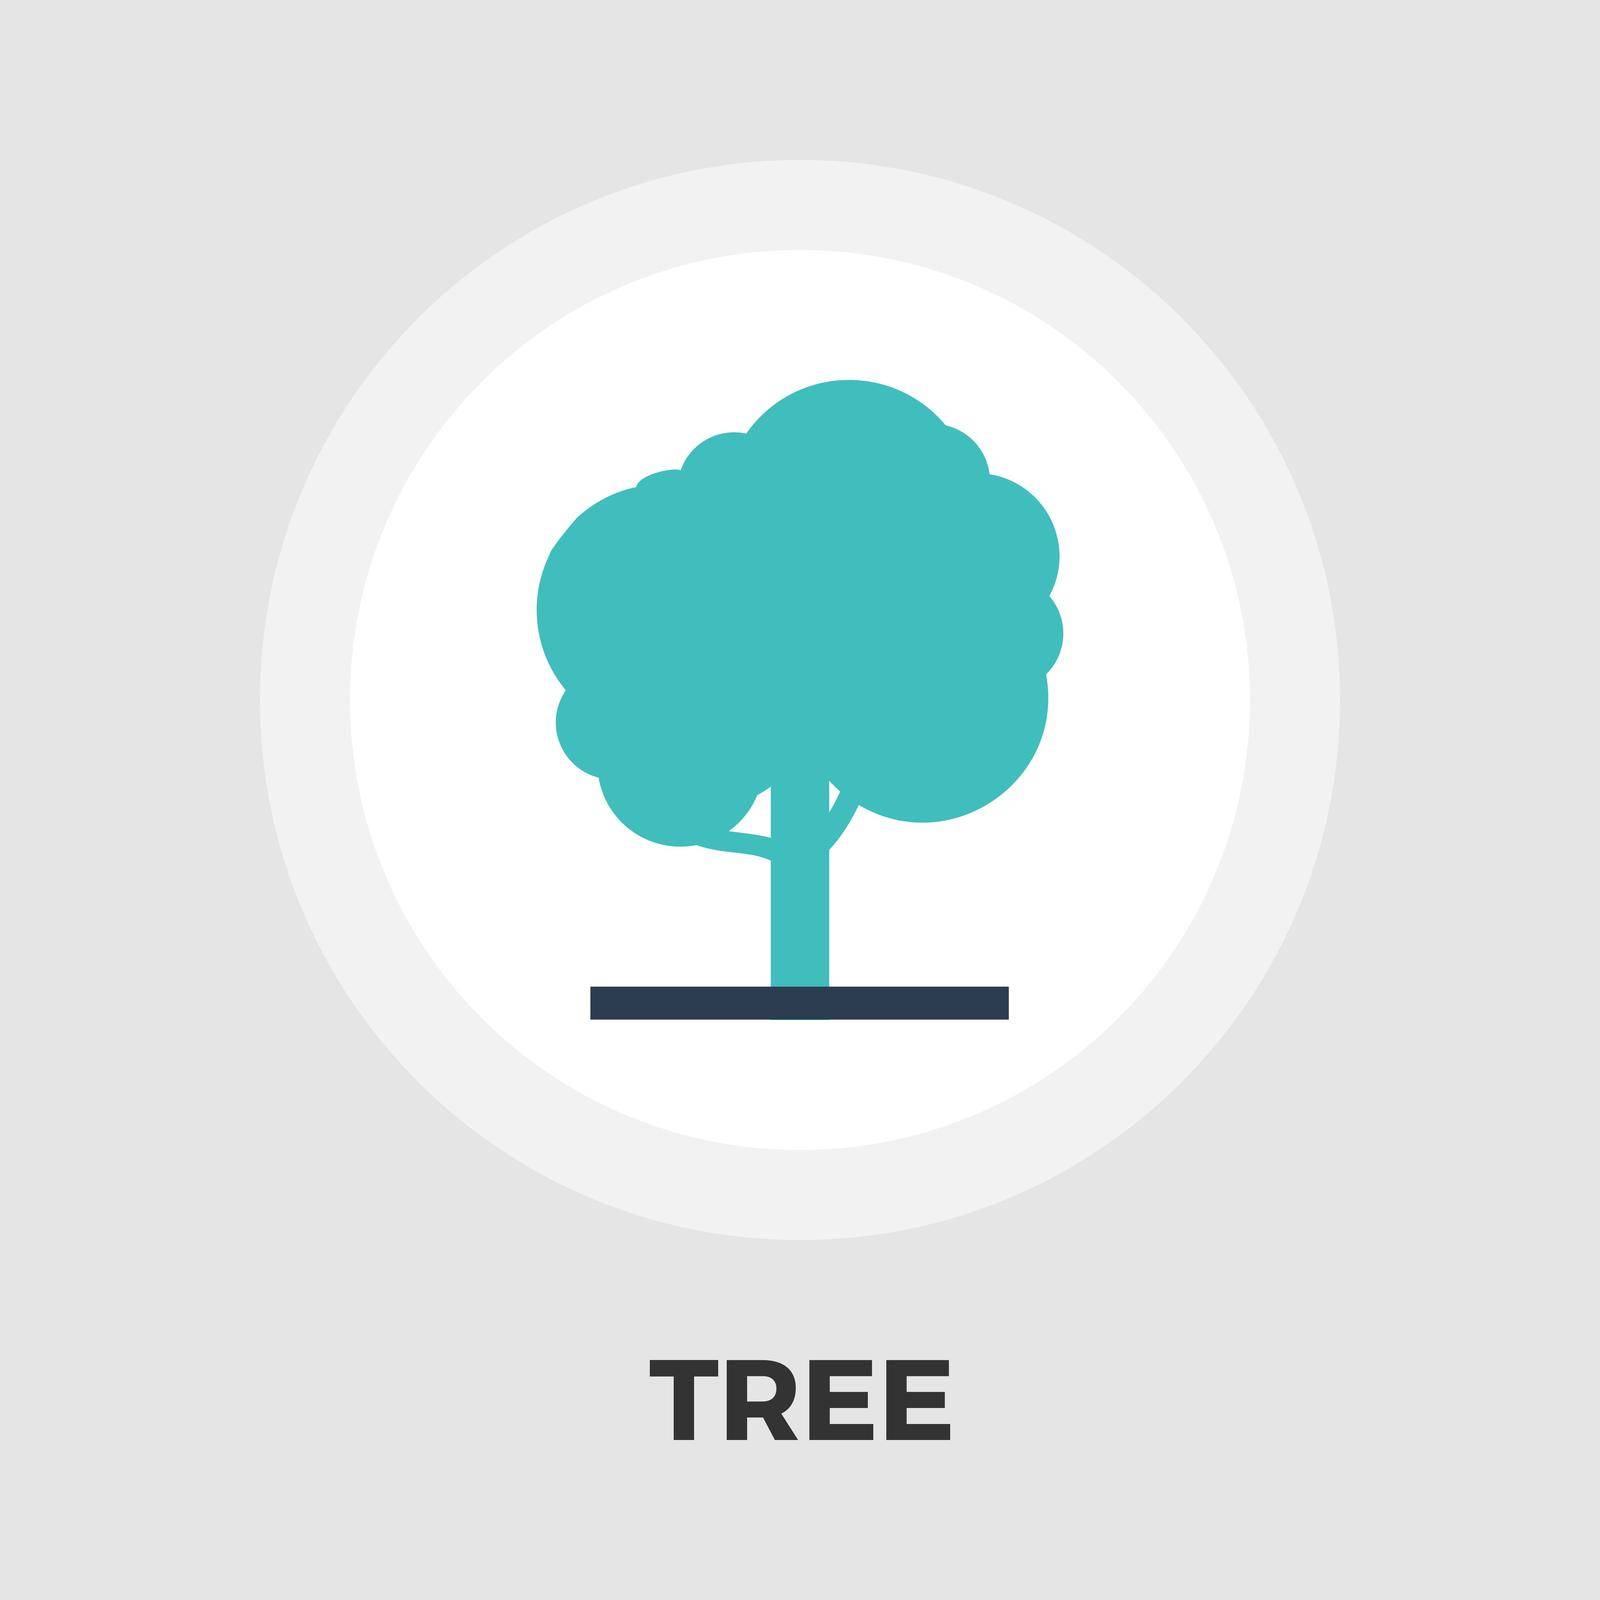 Tree icon vector. Flat icon isolated on the white background. Editable EPS file. Vector illustration.